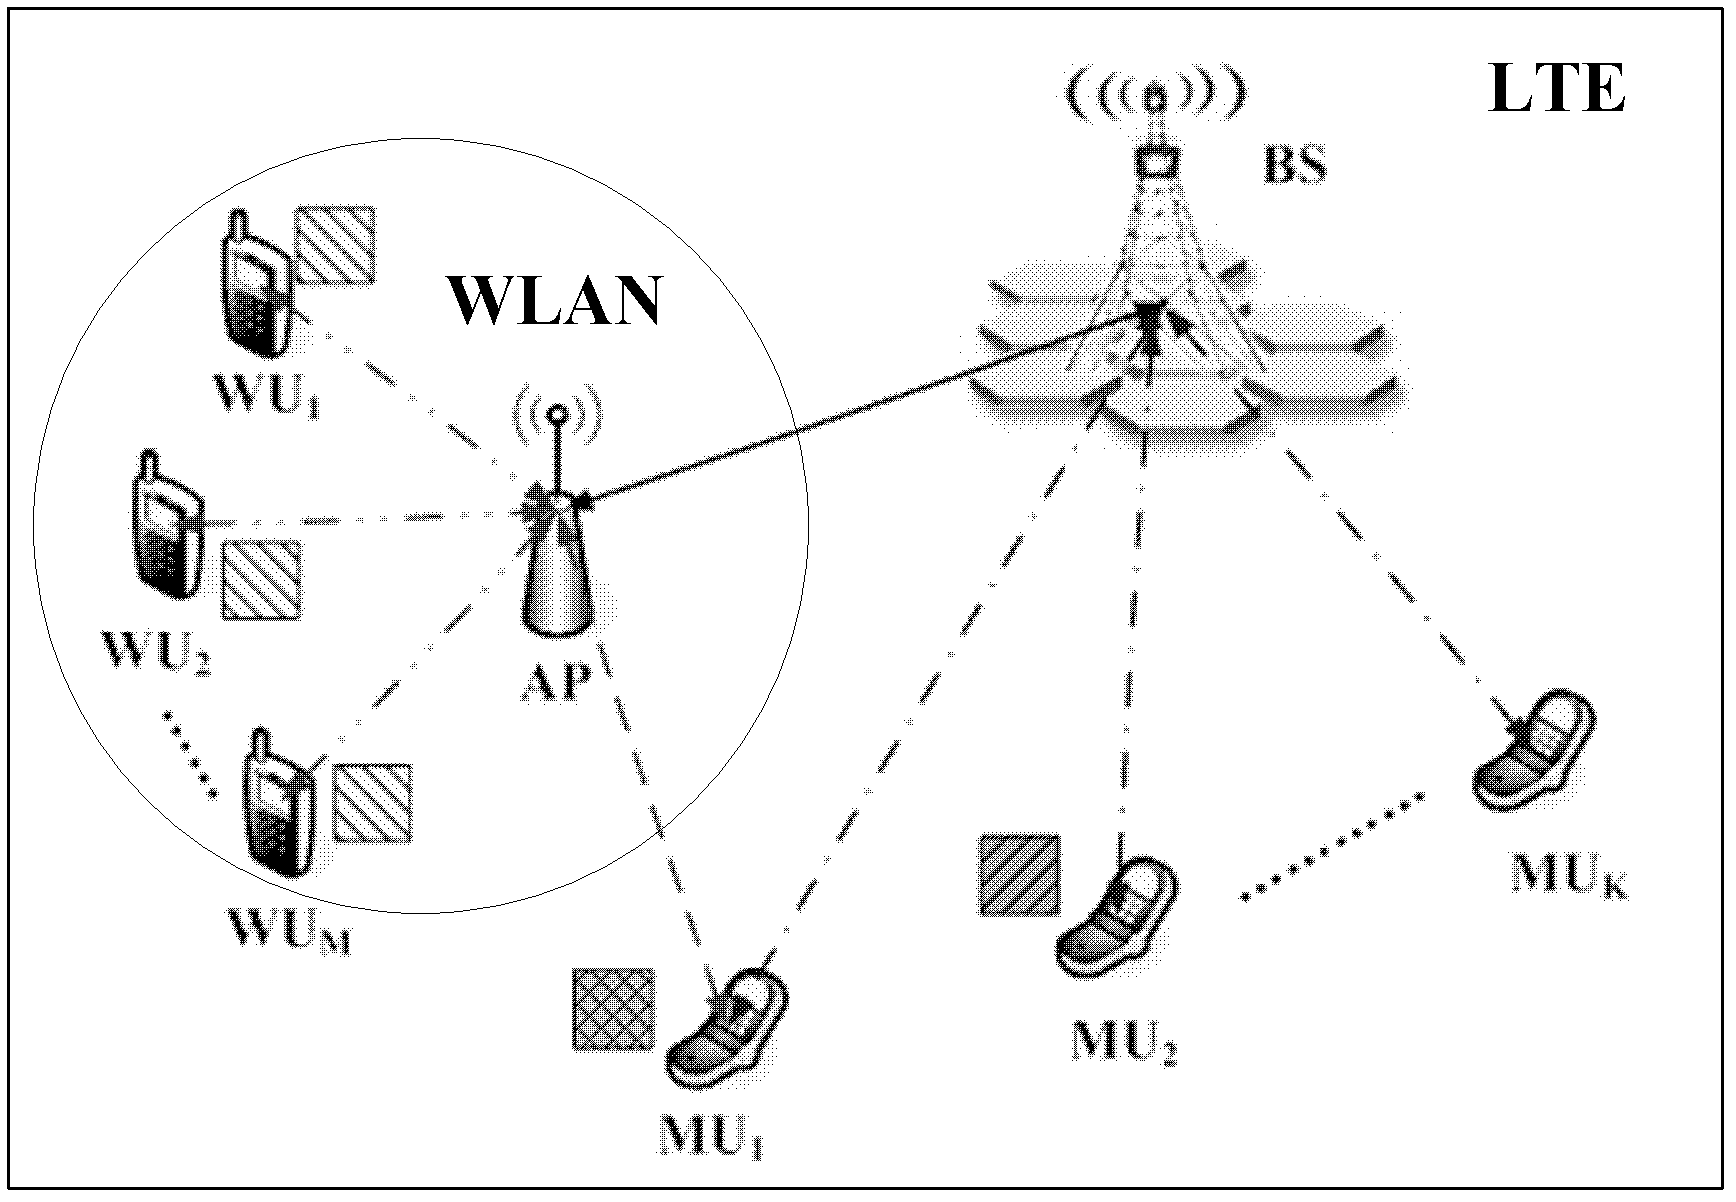 Cooperation-based resource allocation method in heterogeneous fusion network